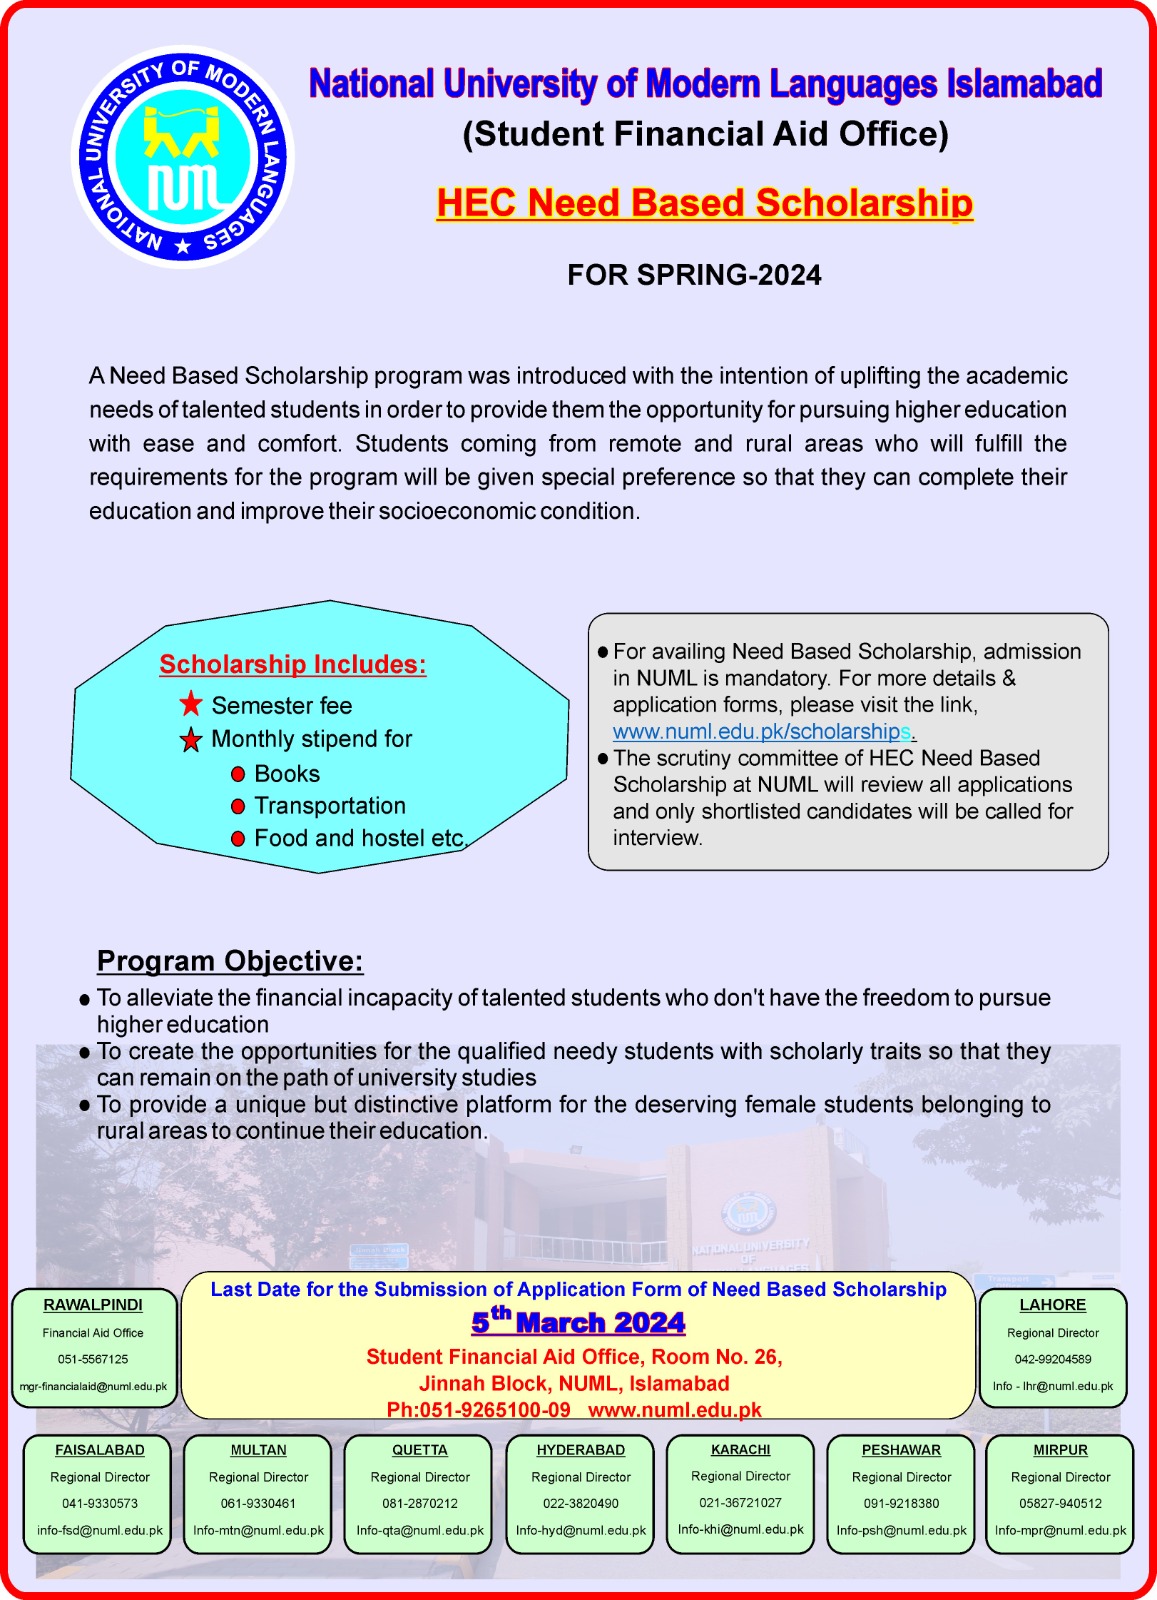 Announcement of HEC Need Based Scholarship for the Semester Spring 2024